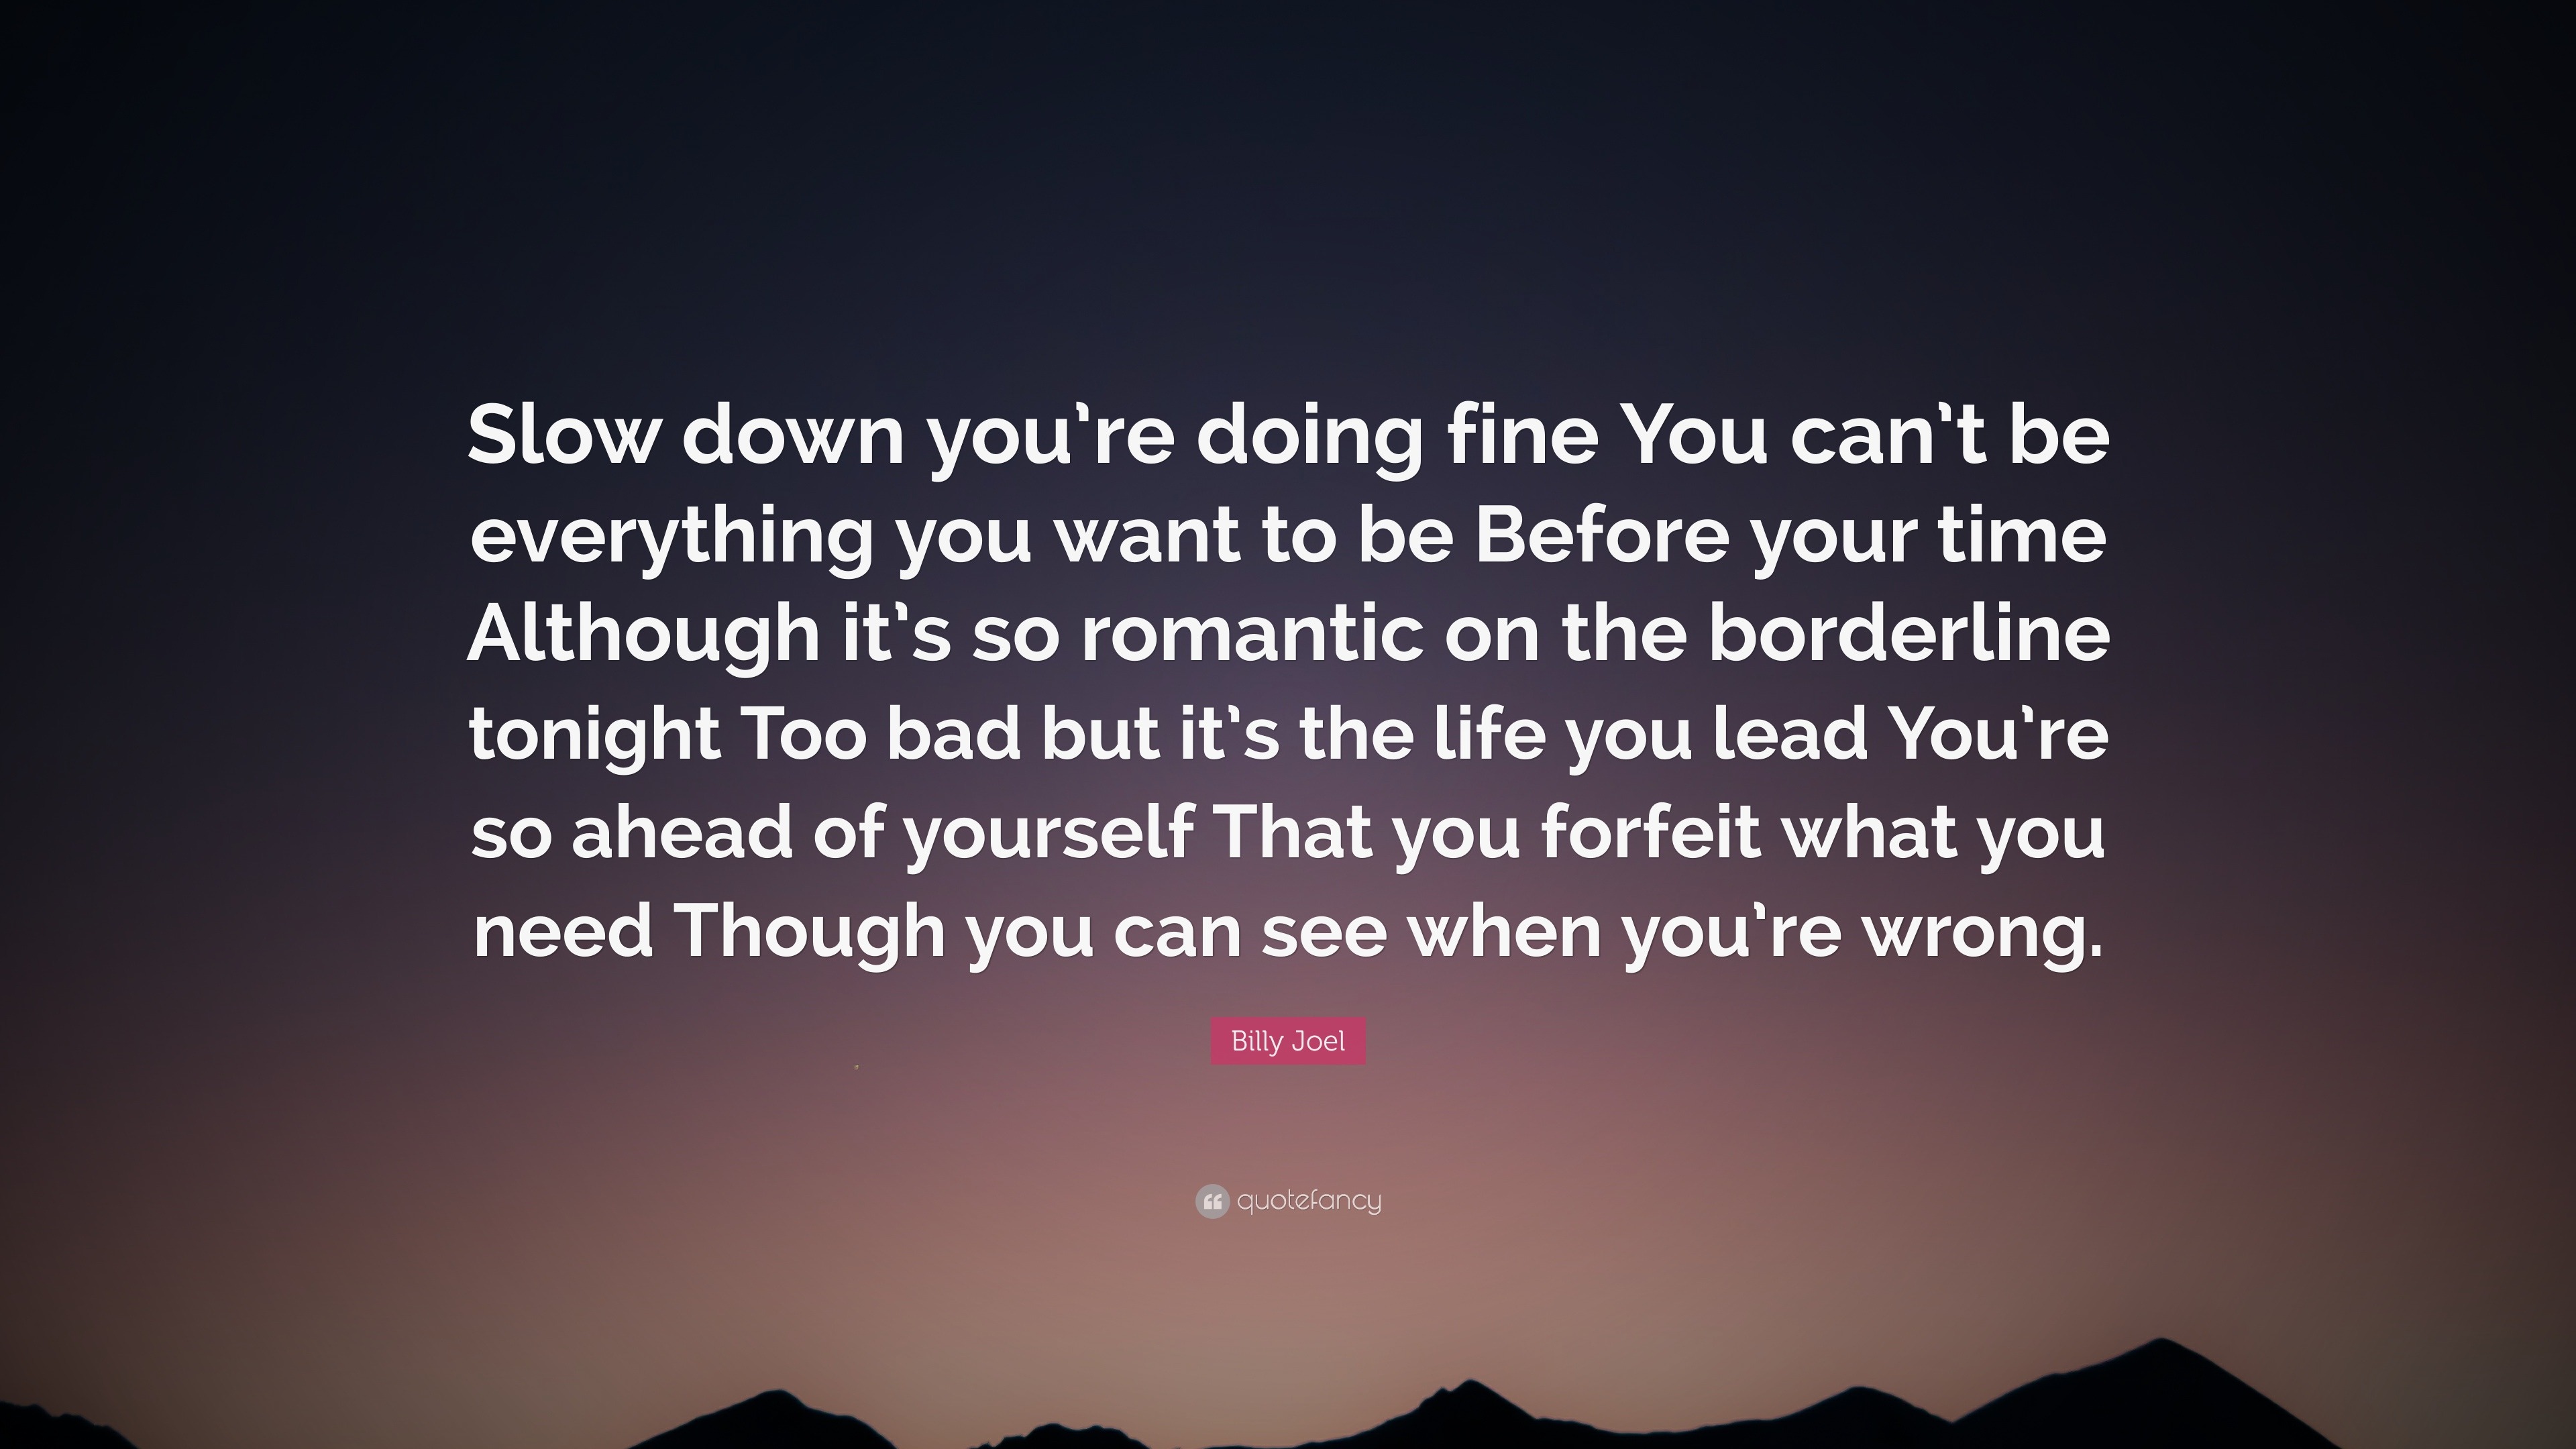 Billy Joel Quote “Slow down you re doing fine You can t